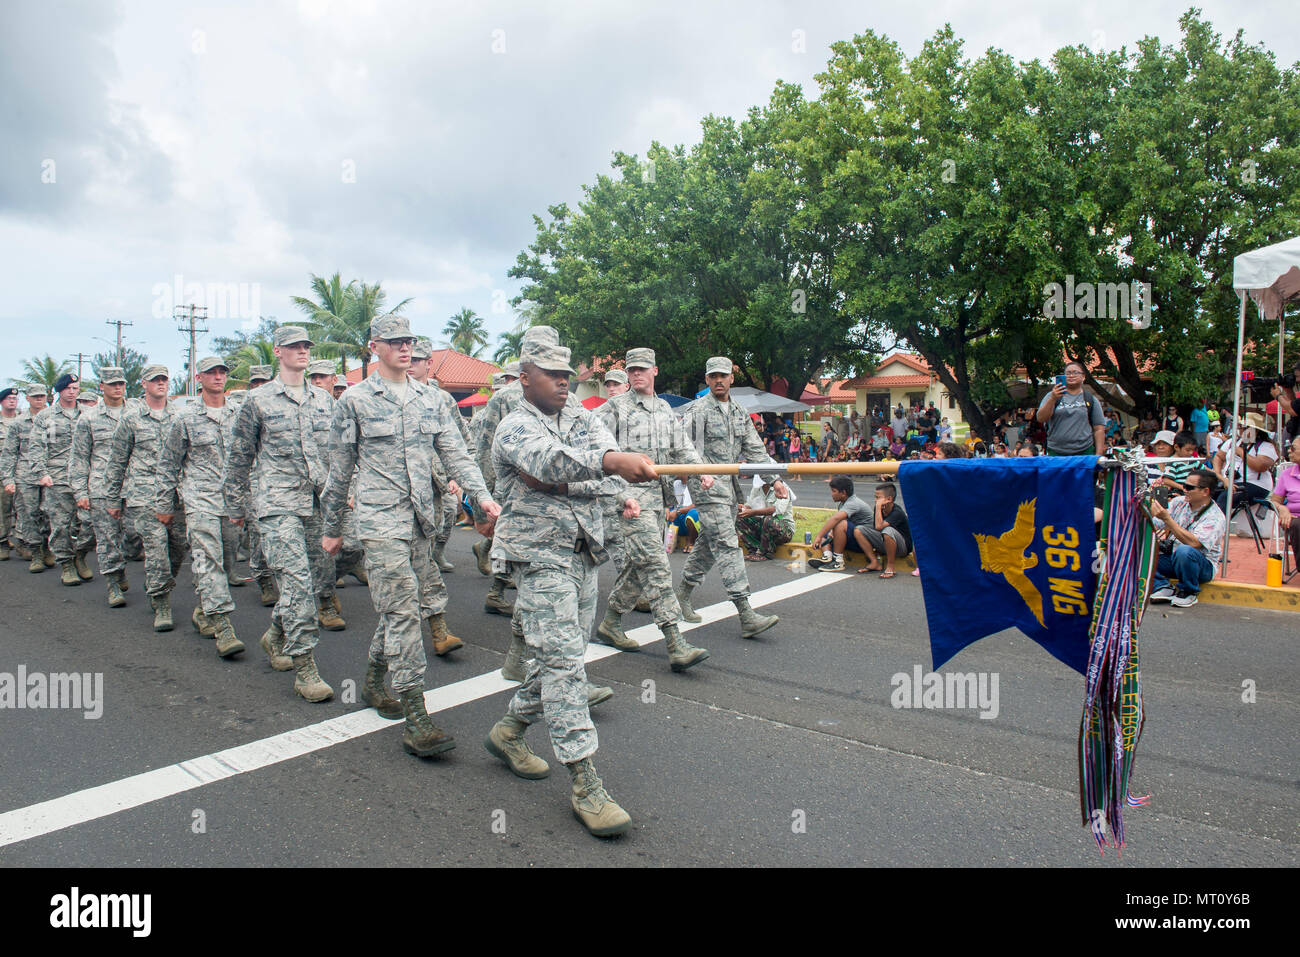 U.S. Airmen from the 36th Wing march in the 73rd Guam Liberation Day parade July 21, 2017, in Hagåtña, Guam. The parade commemorated 73 years since U.S. armed forces liberated the island from Japanese occupation. During World War II, Japan seized Guam on December 10, 1941, and on July 21, 1944, the U.S. armed forces liberated the island. (U.S. Air Force photo by Airman 1st Class Christopher Quail) Stock Photo